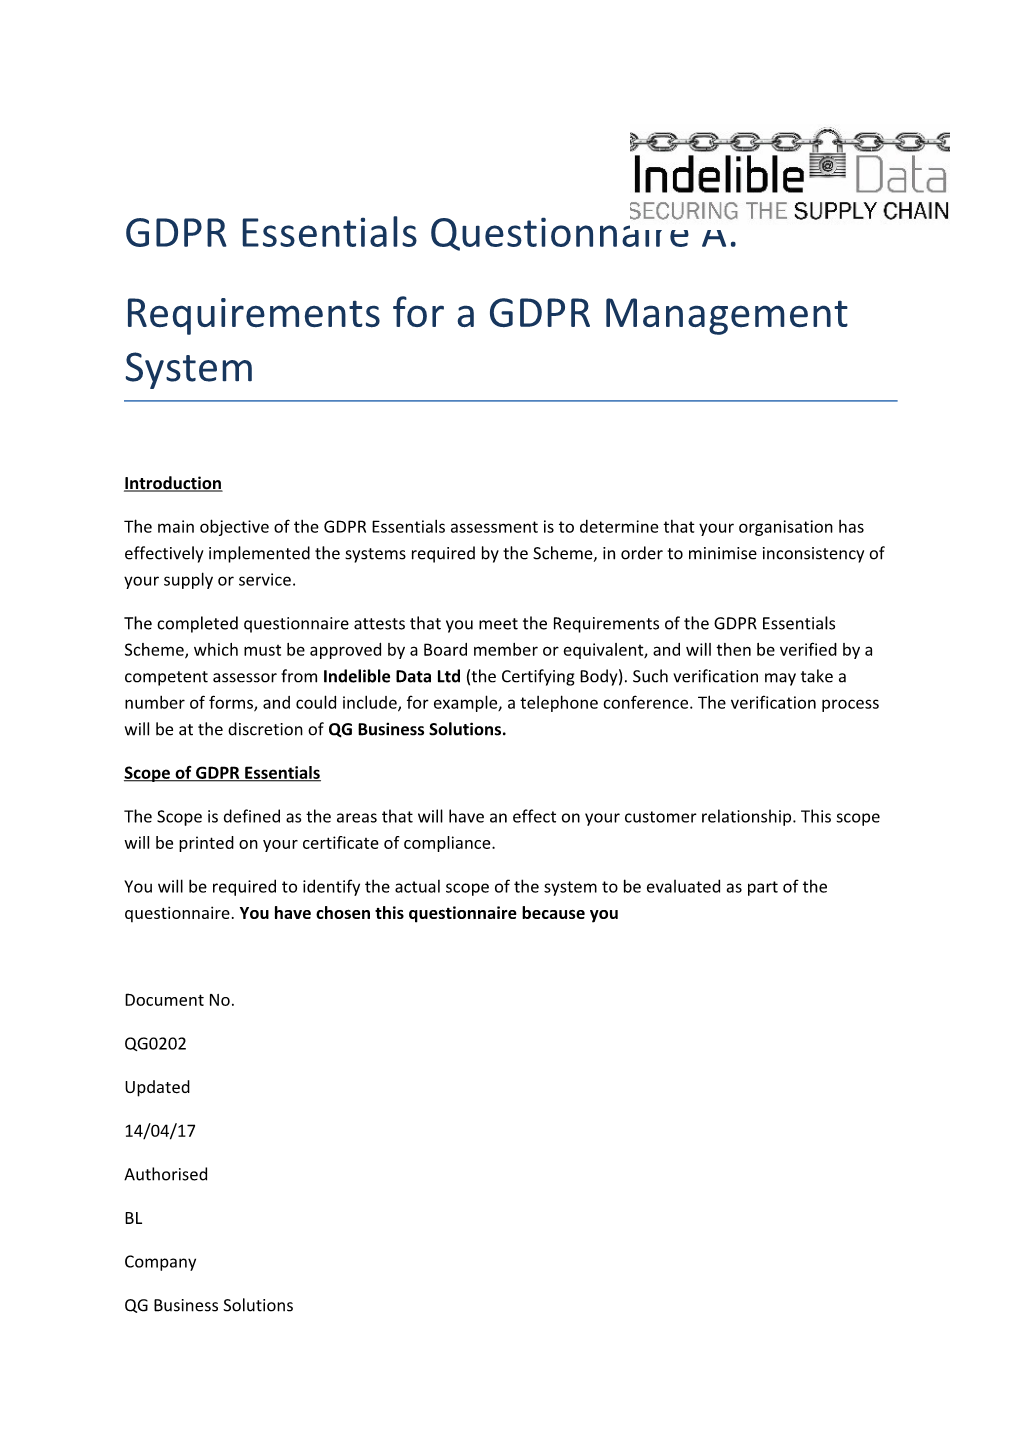 Requirements for a GDPR Management System